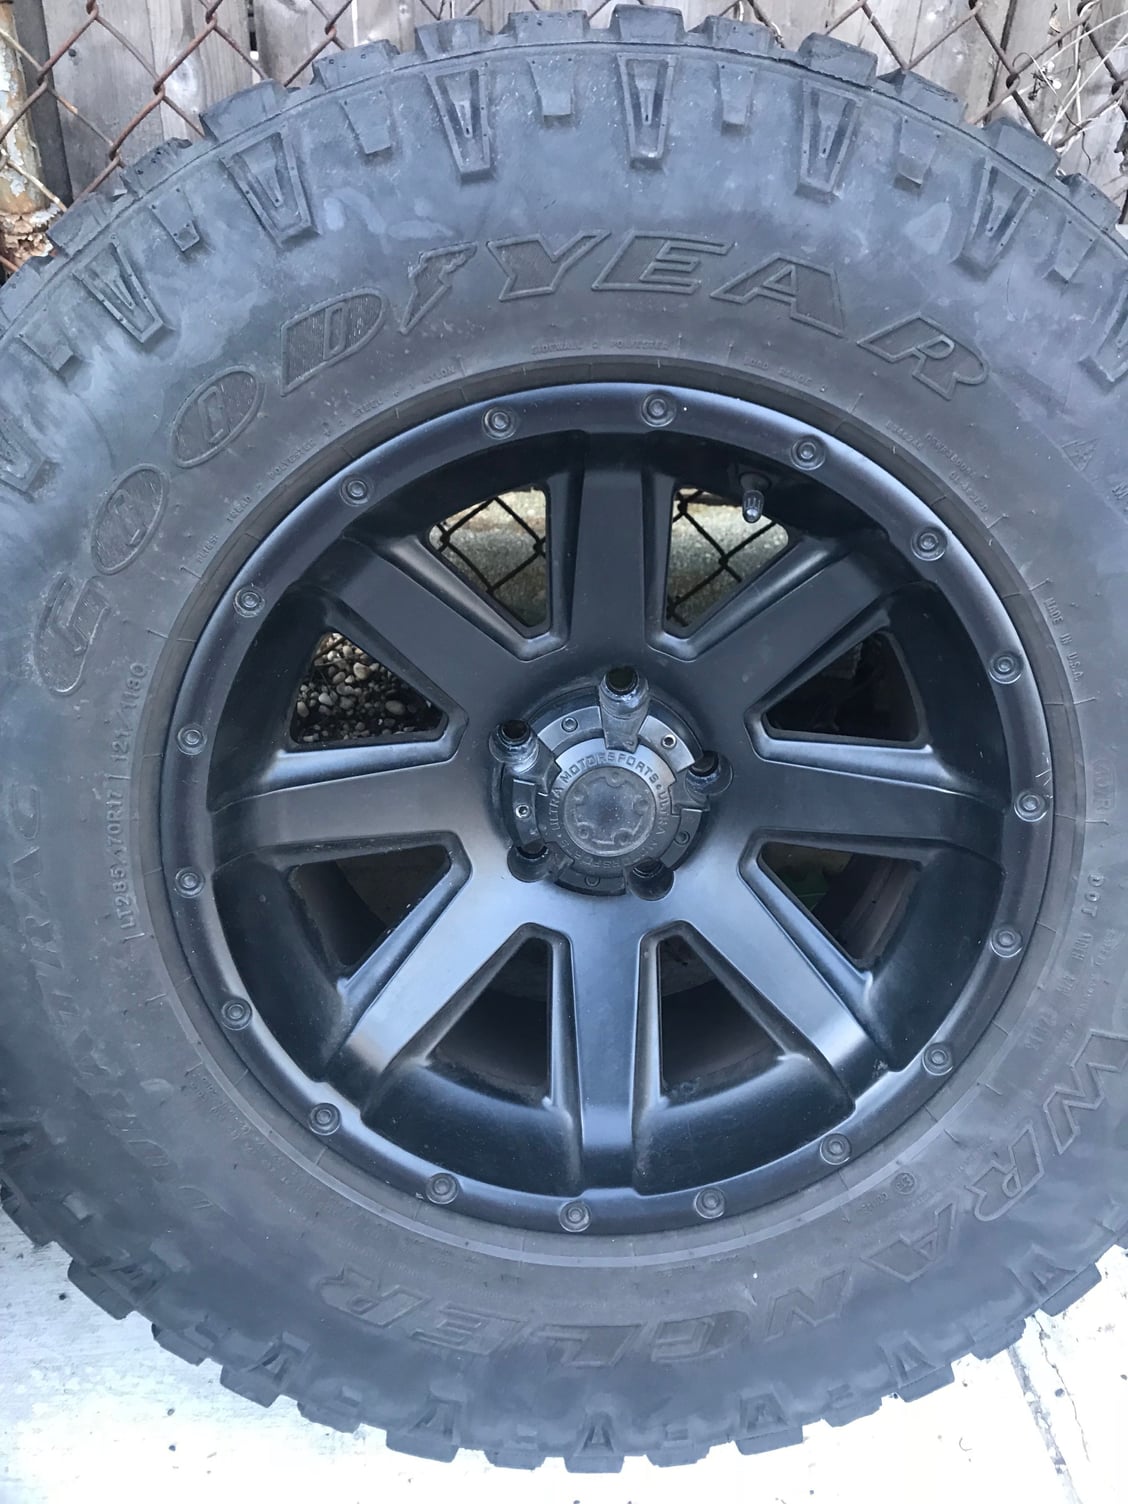 Wheels and Tires/Axles - FS: Set of 4 17 inch Ultra Crusher wheels and tires - Used - 2006 to 2017 Jeep Wrangler - Brooklyn, NY 11223, United States